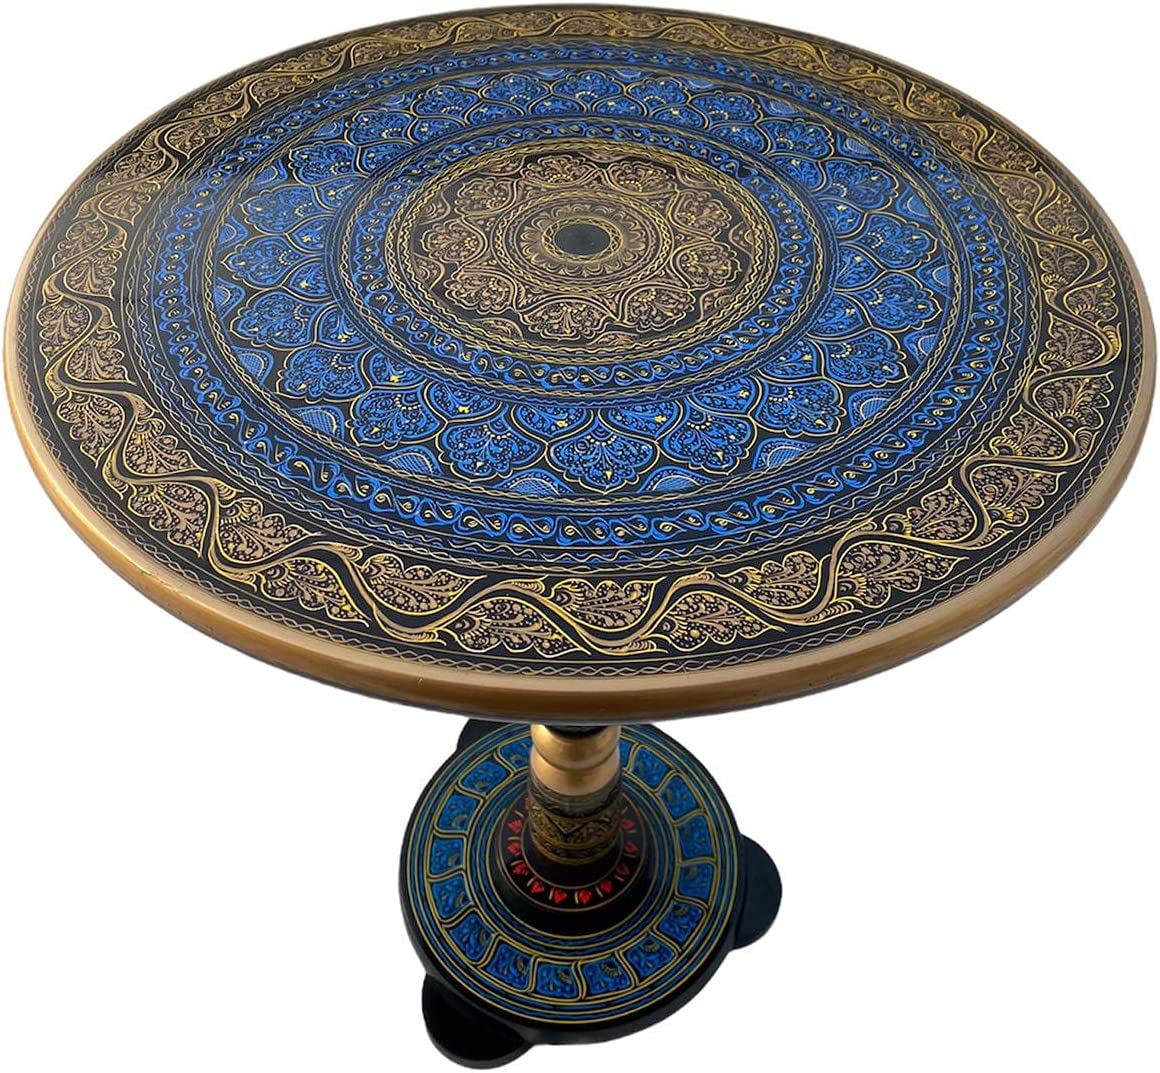 Blue and Golden Lacquer Art Table - 18 inch I Handcrafted Round Table for Living Room or End Table for Bedroom Beautiful Gift for Home Invitations I Nakshi Art I  (Aqua Gold)